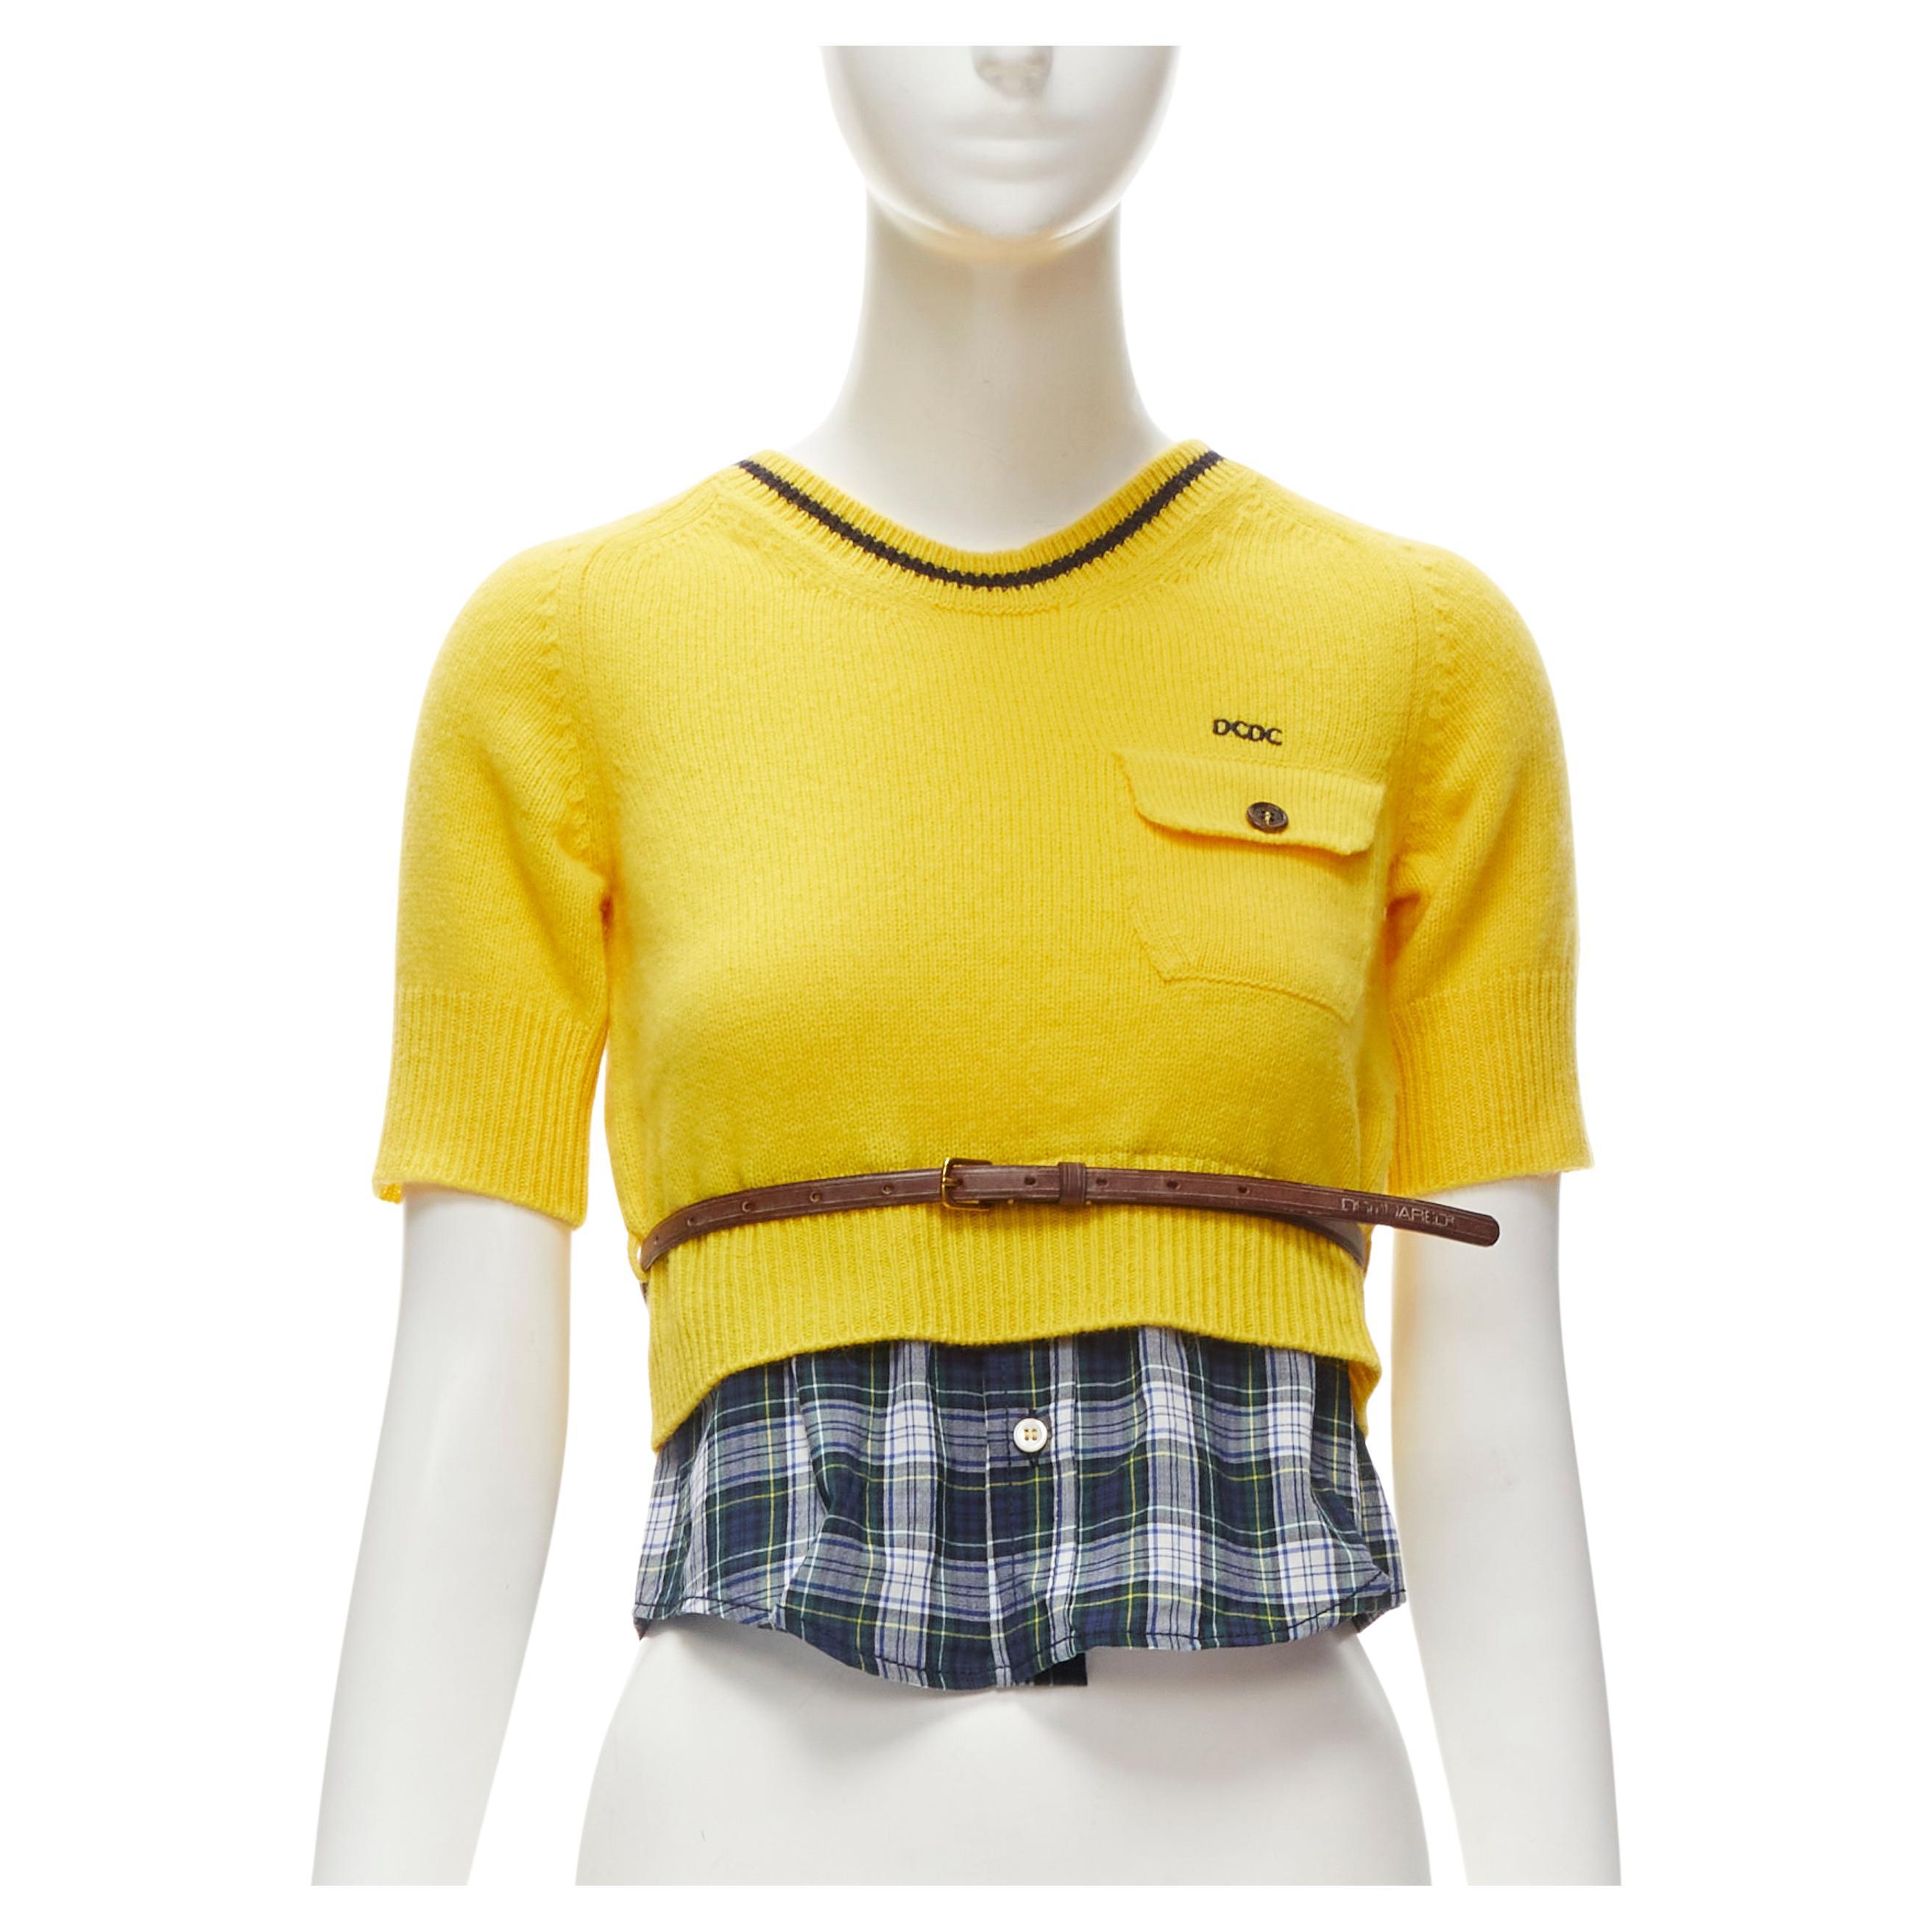 DSQUARED2 DCDC embroidered yellow cropped shirt hem belted sweater S For Sale